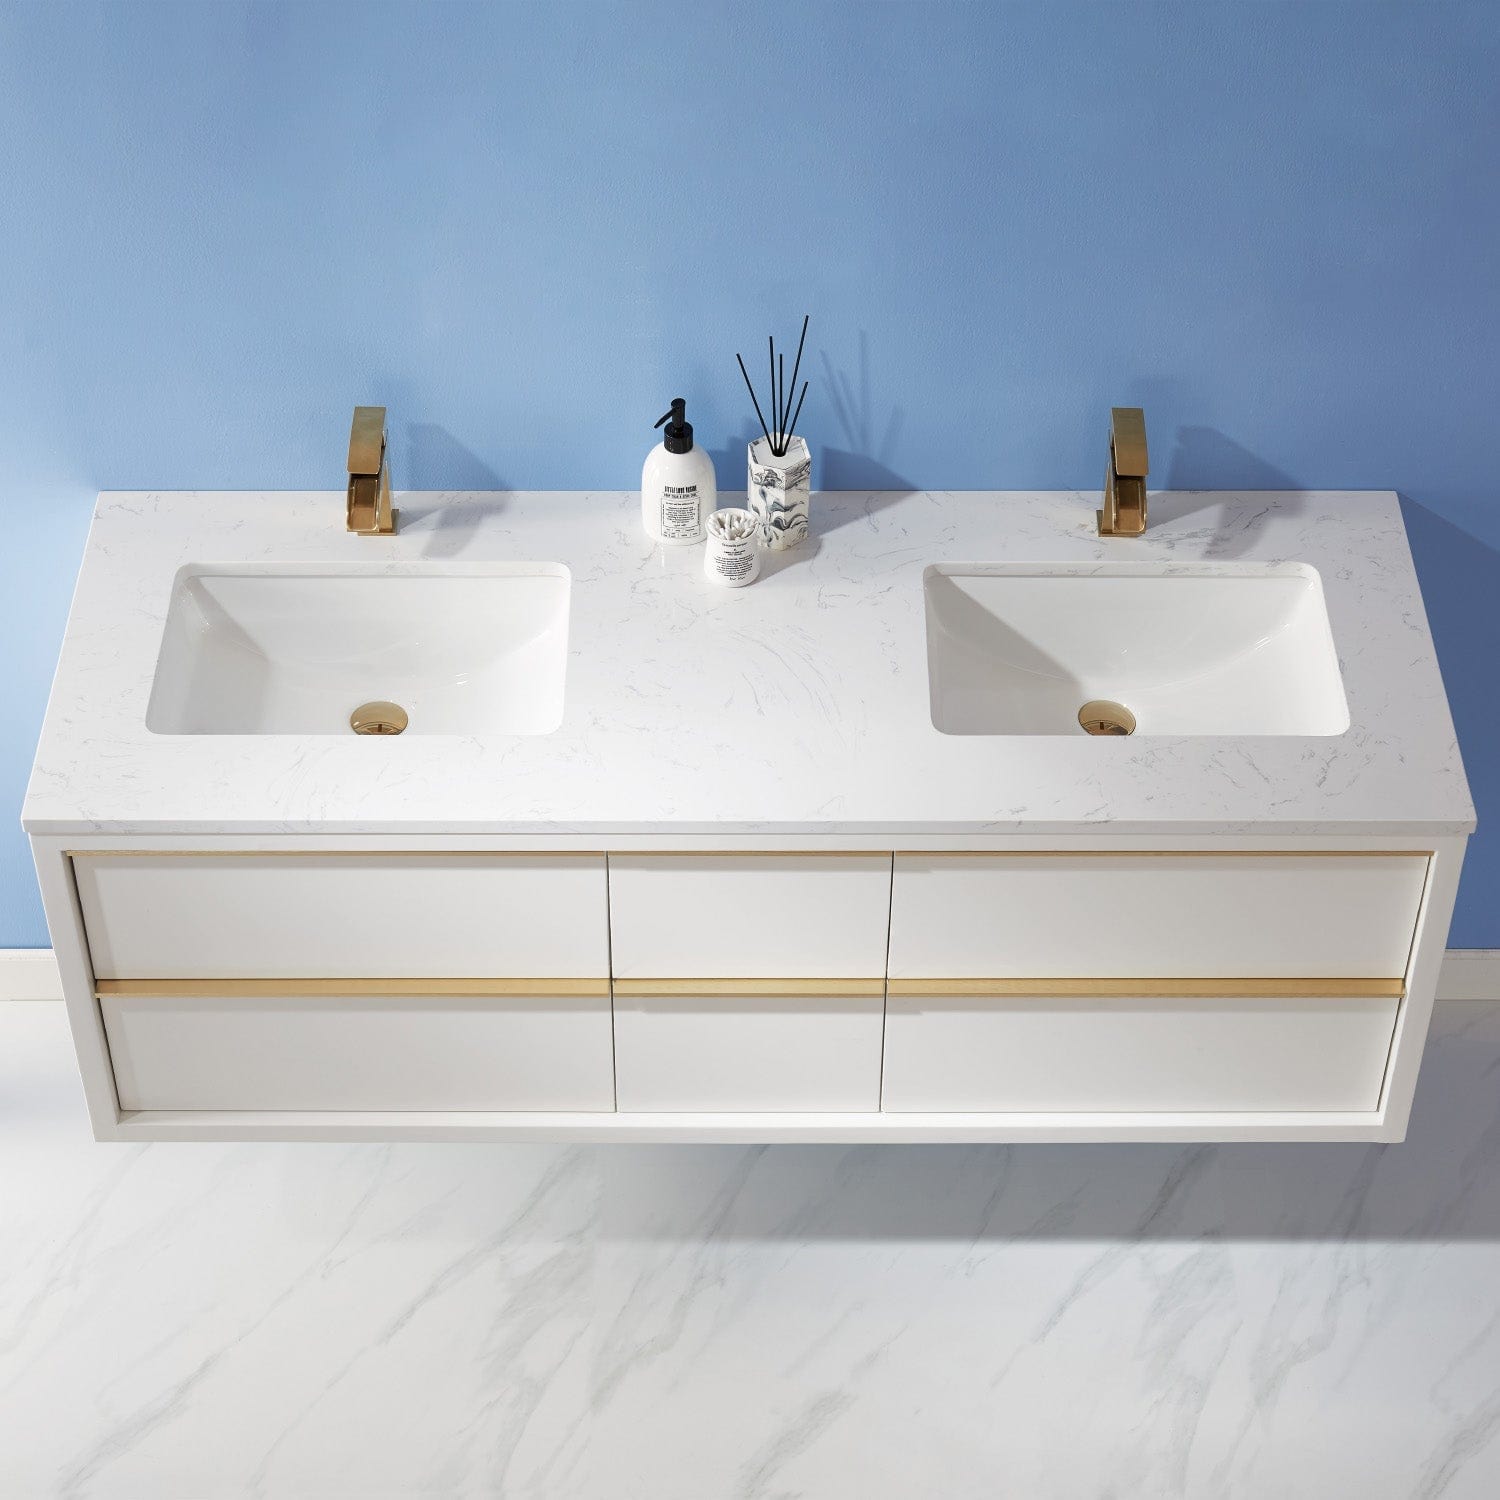 Altair Morgan 60" Double Bathroom Vanity Set in White and Composite Carrara White Stone Countertop without Mirror 534060-WH-AW-NM - Molaix631112971805Vanity534060-WH-AW-NM